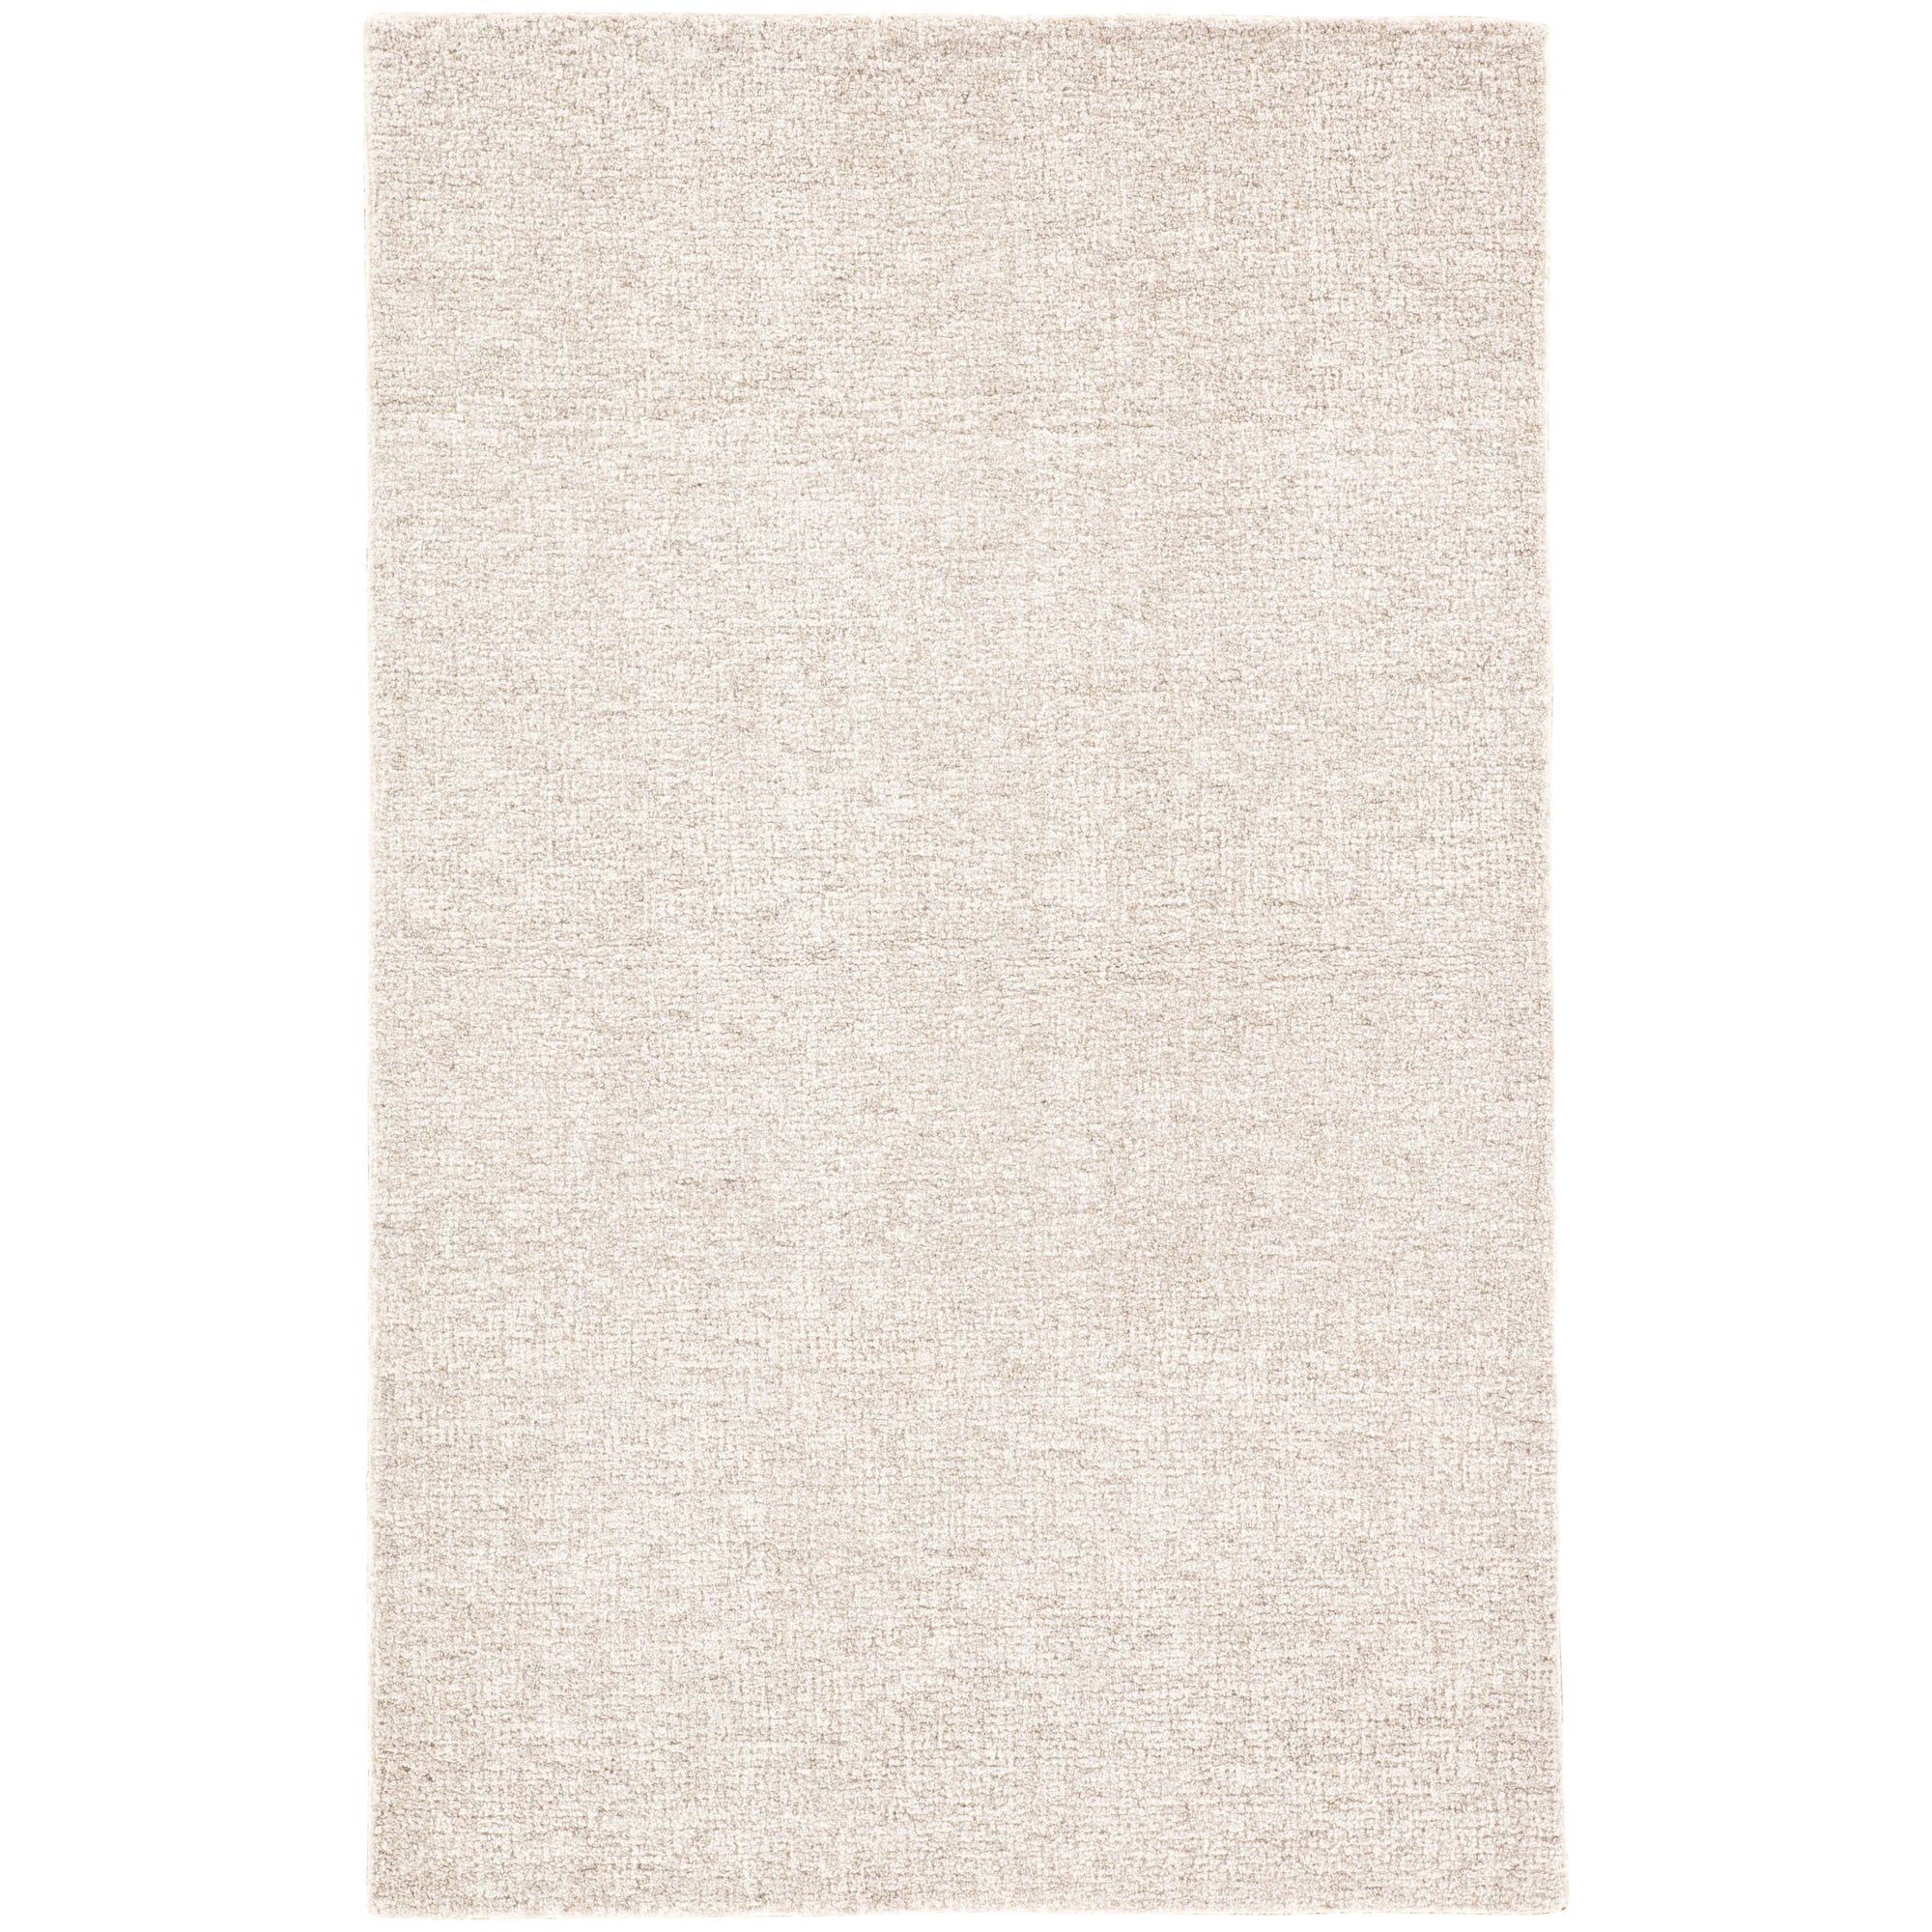 Rugs by Roo | Jaipur Living Oland Handmade Solid Ivory Gray Area Rug-RUG139221